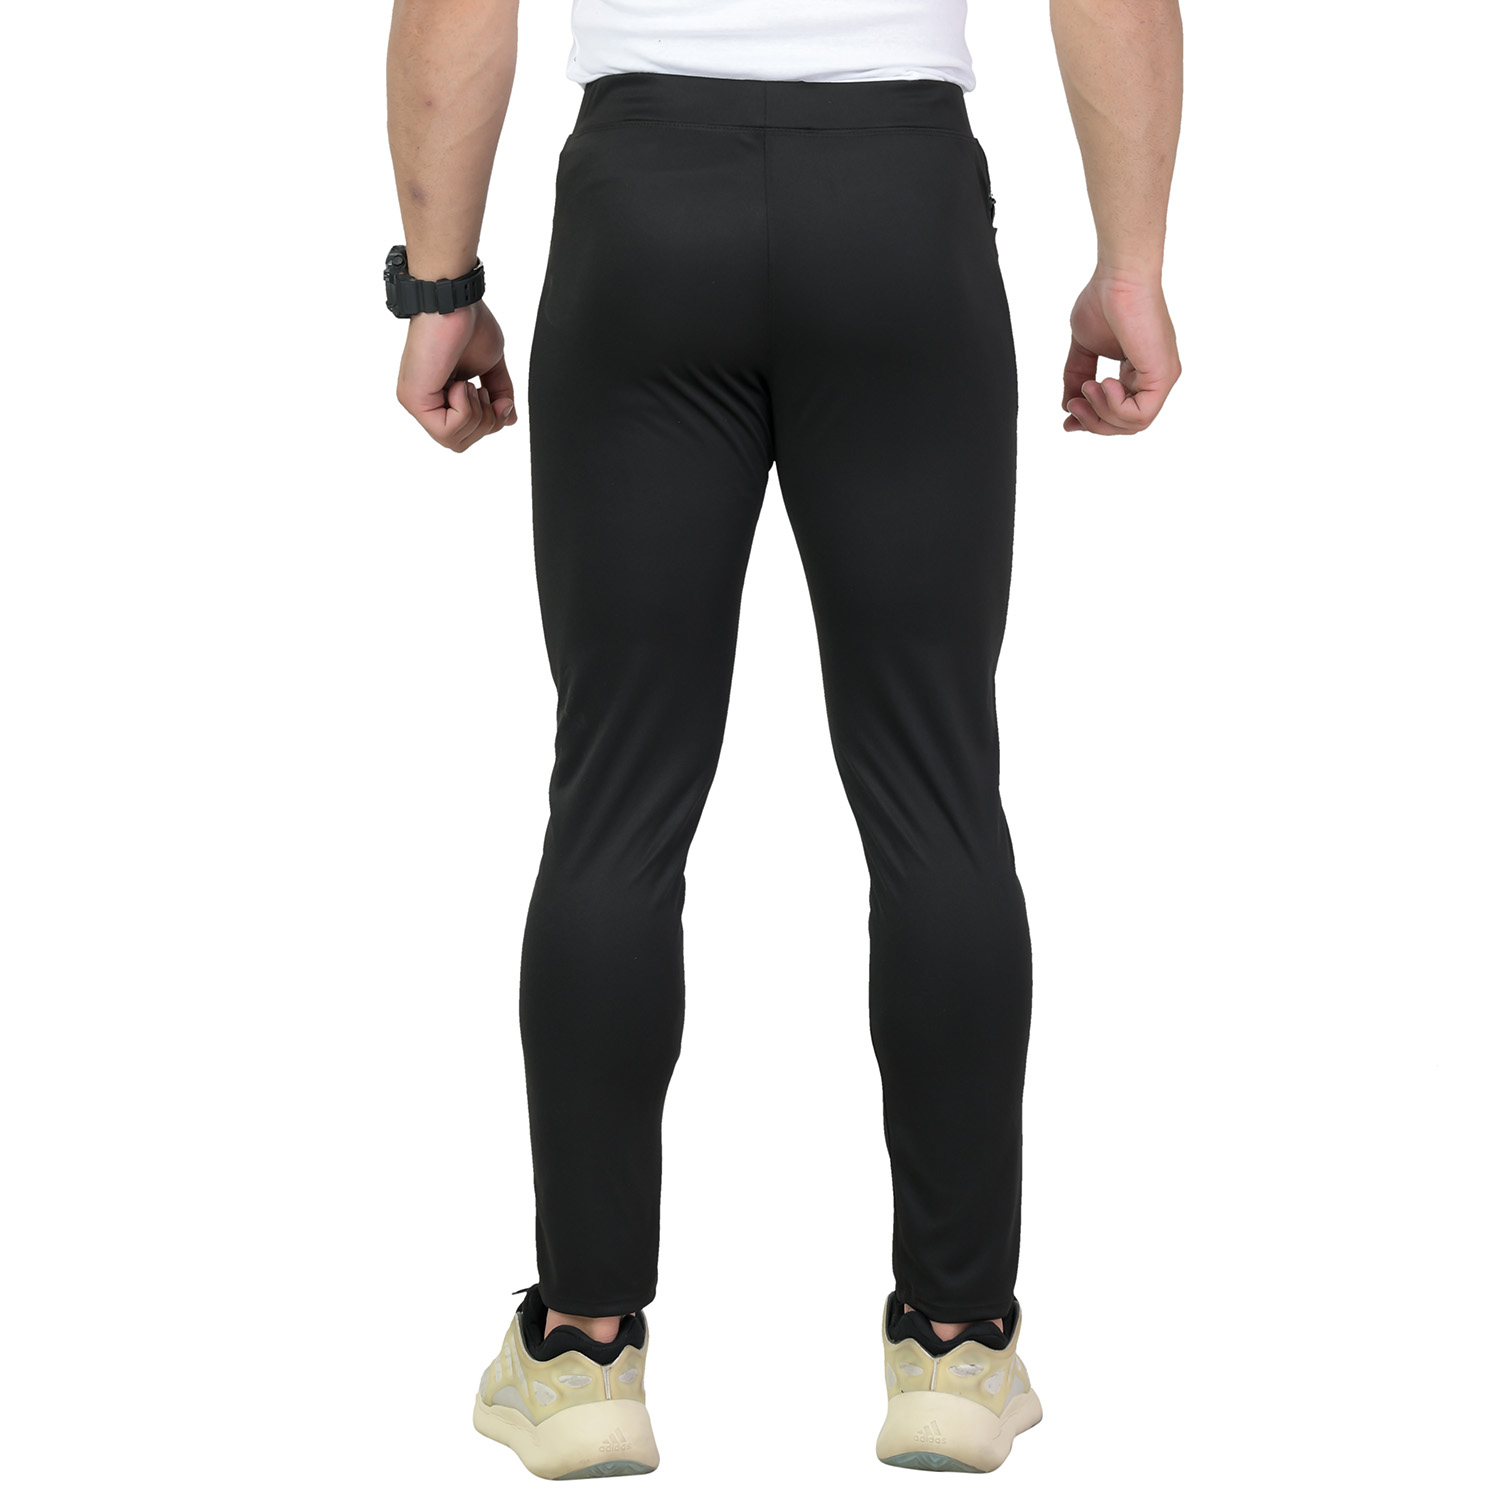 Men's Moisture Wicking Sports Track Pants - Global Textile Source